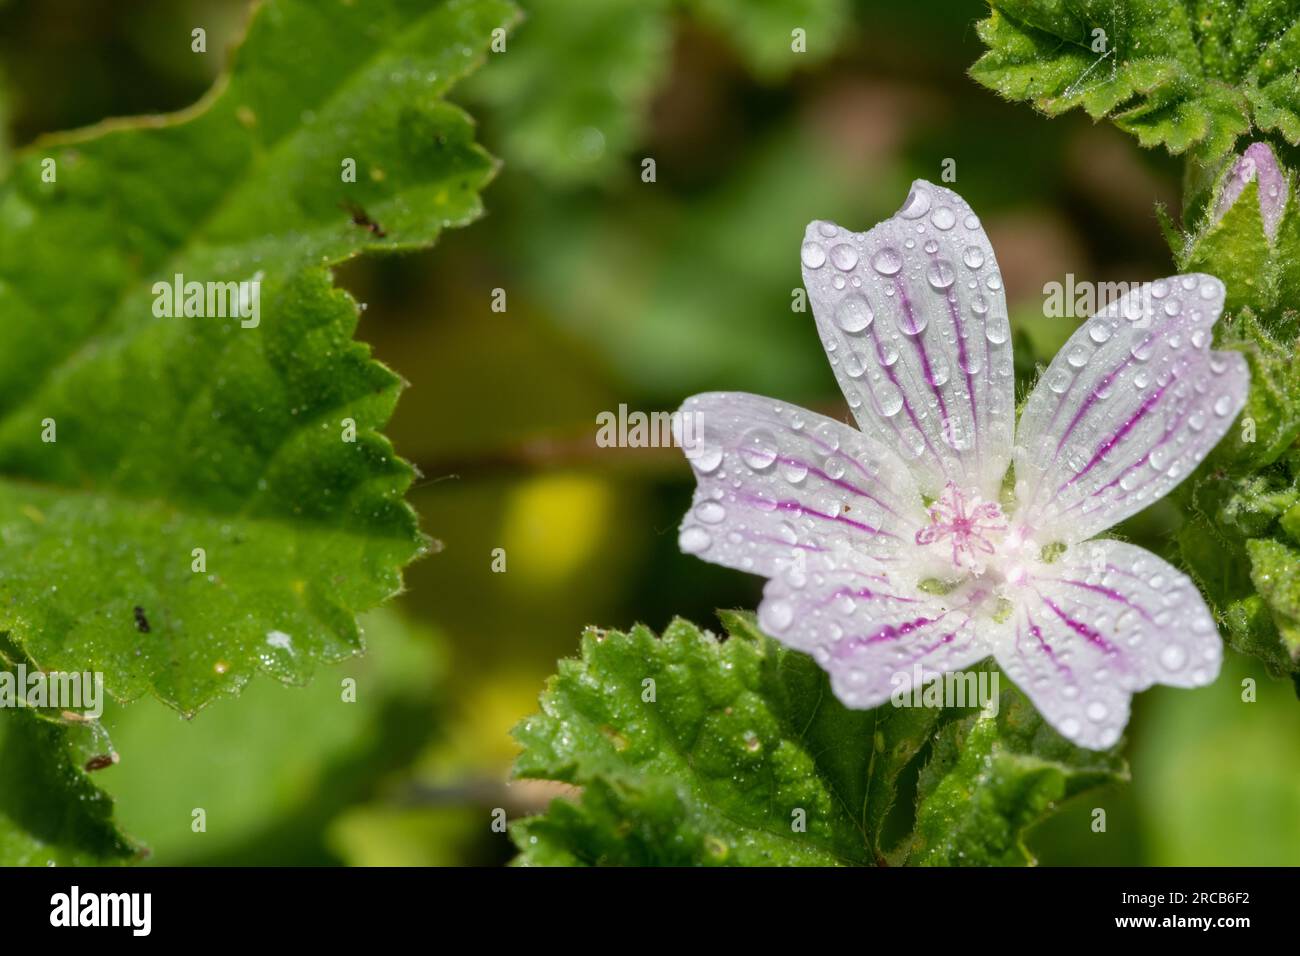 Close up of a common mallow (malva neglecta) flower covered in dew droplets Stock Photo